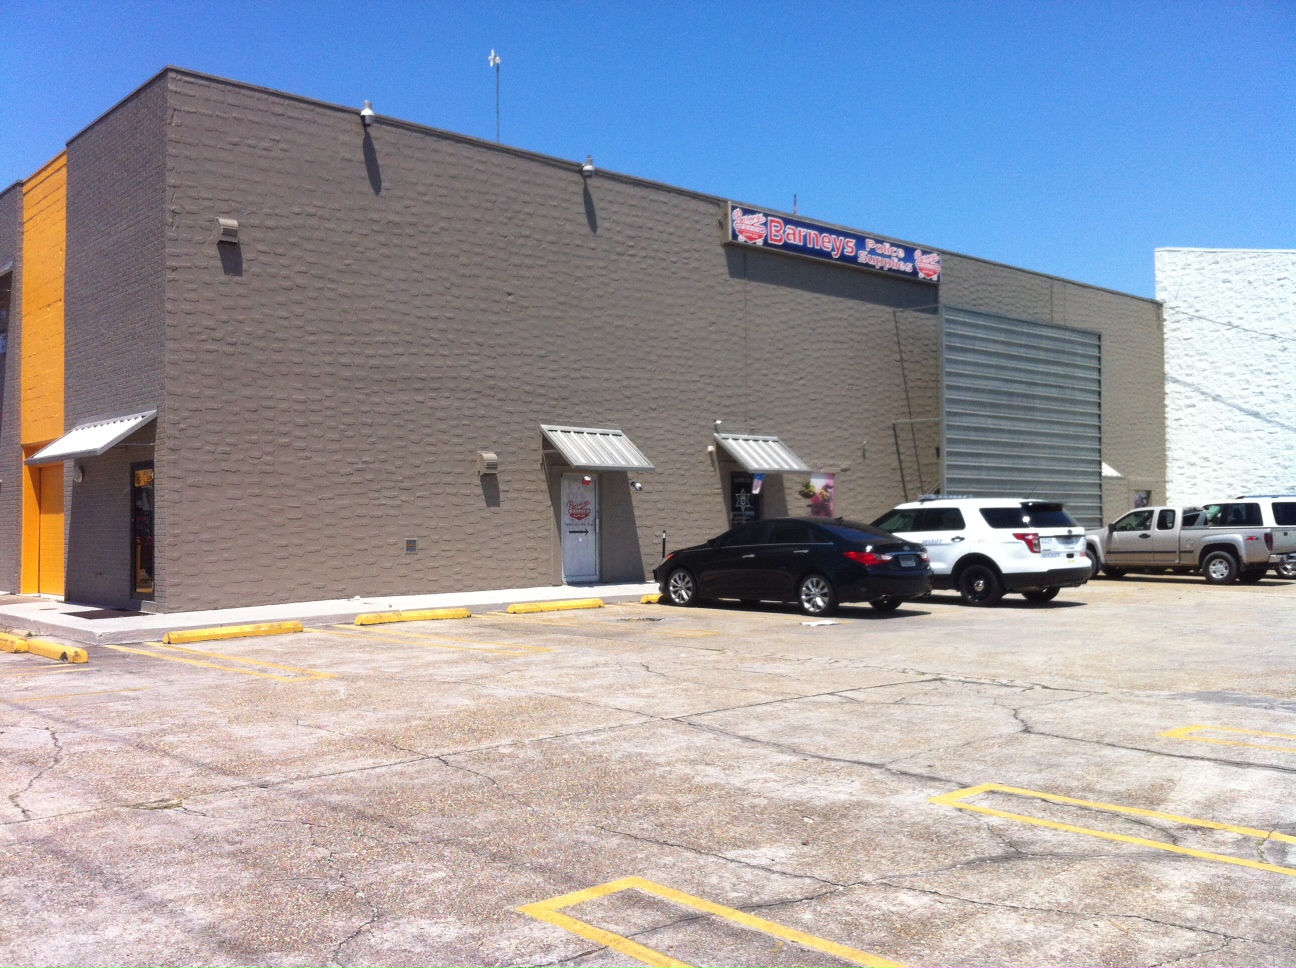 Barney's Police Supplies of Metairie